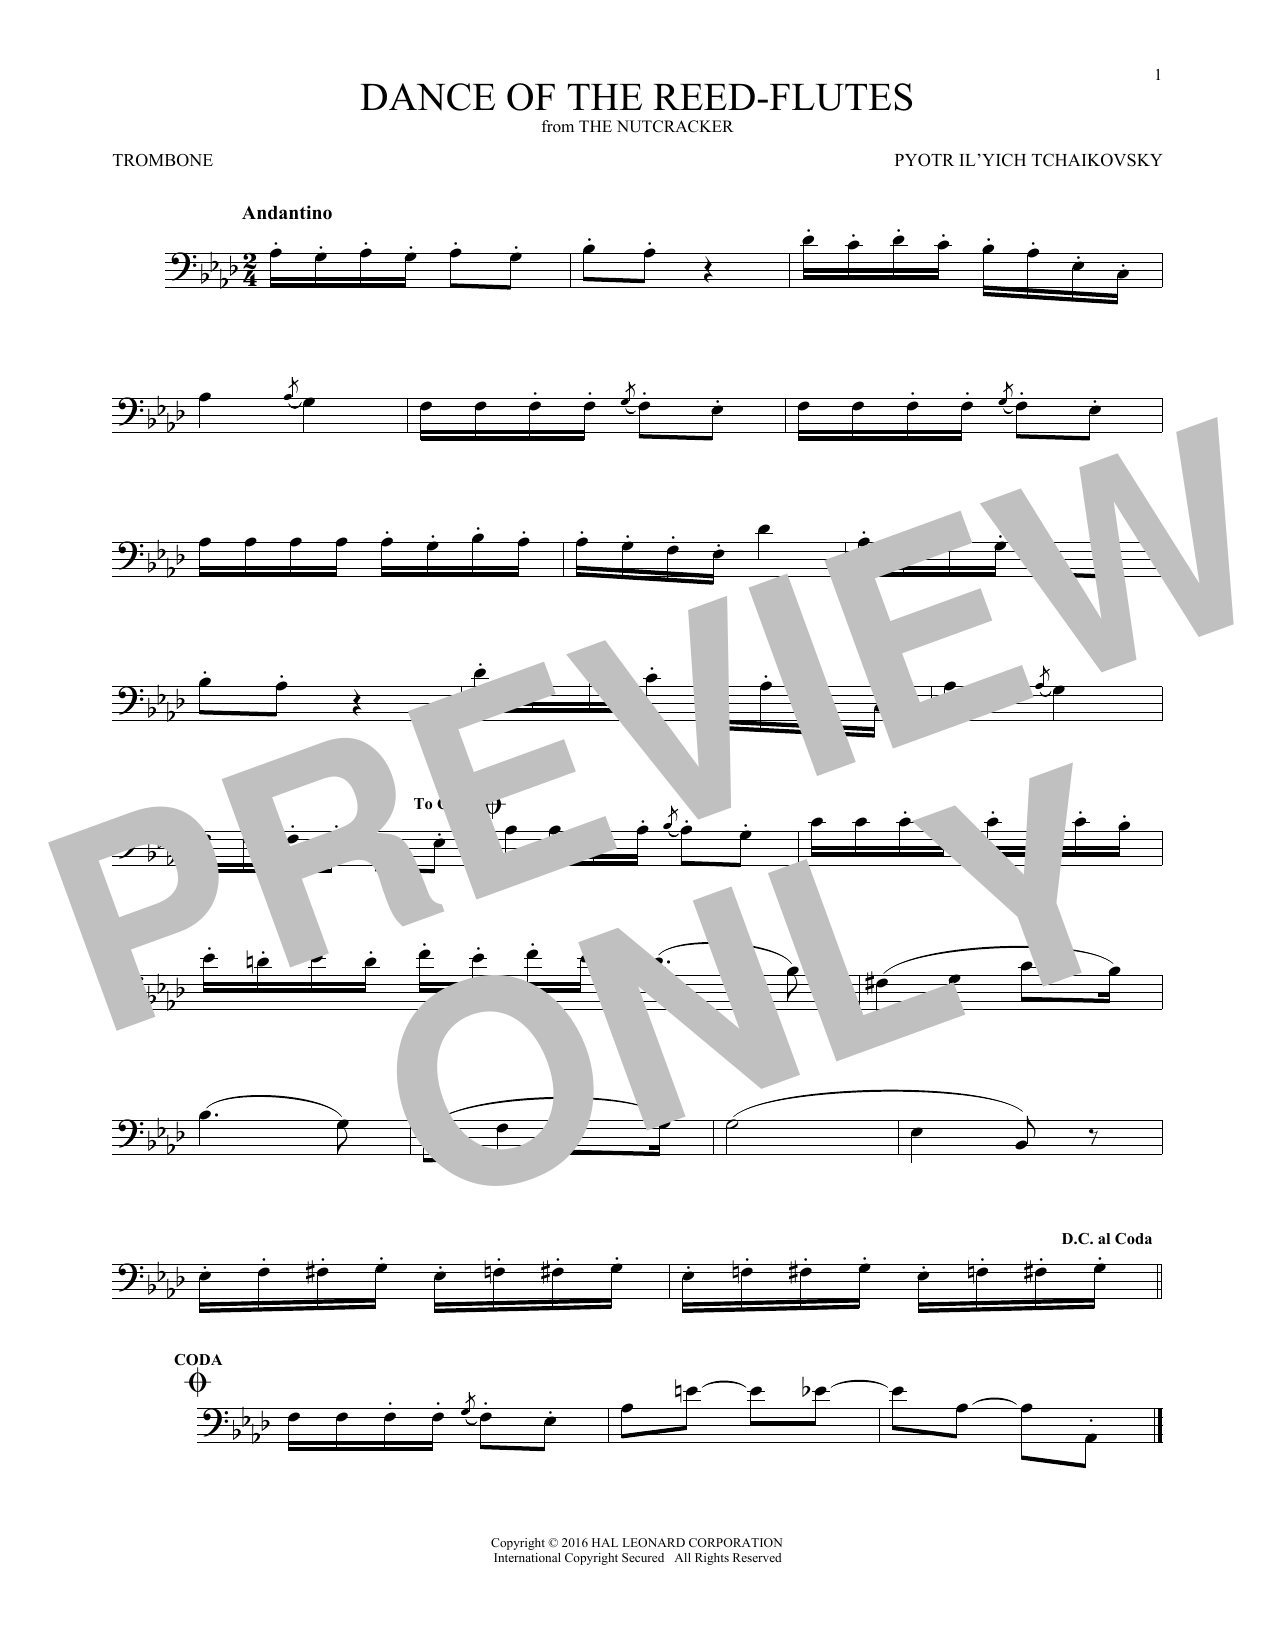 Download Pyotr Il'yich Tchaikovsky Dance Of The Reed Flutes, Op. 71a Sheet Music